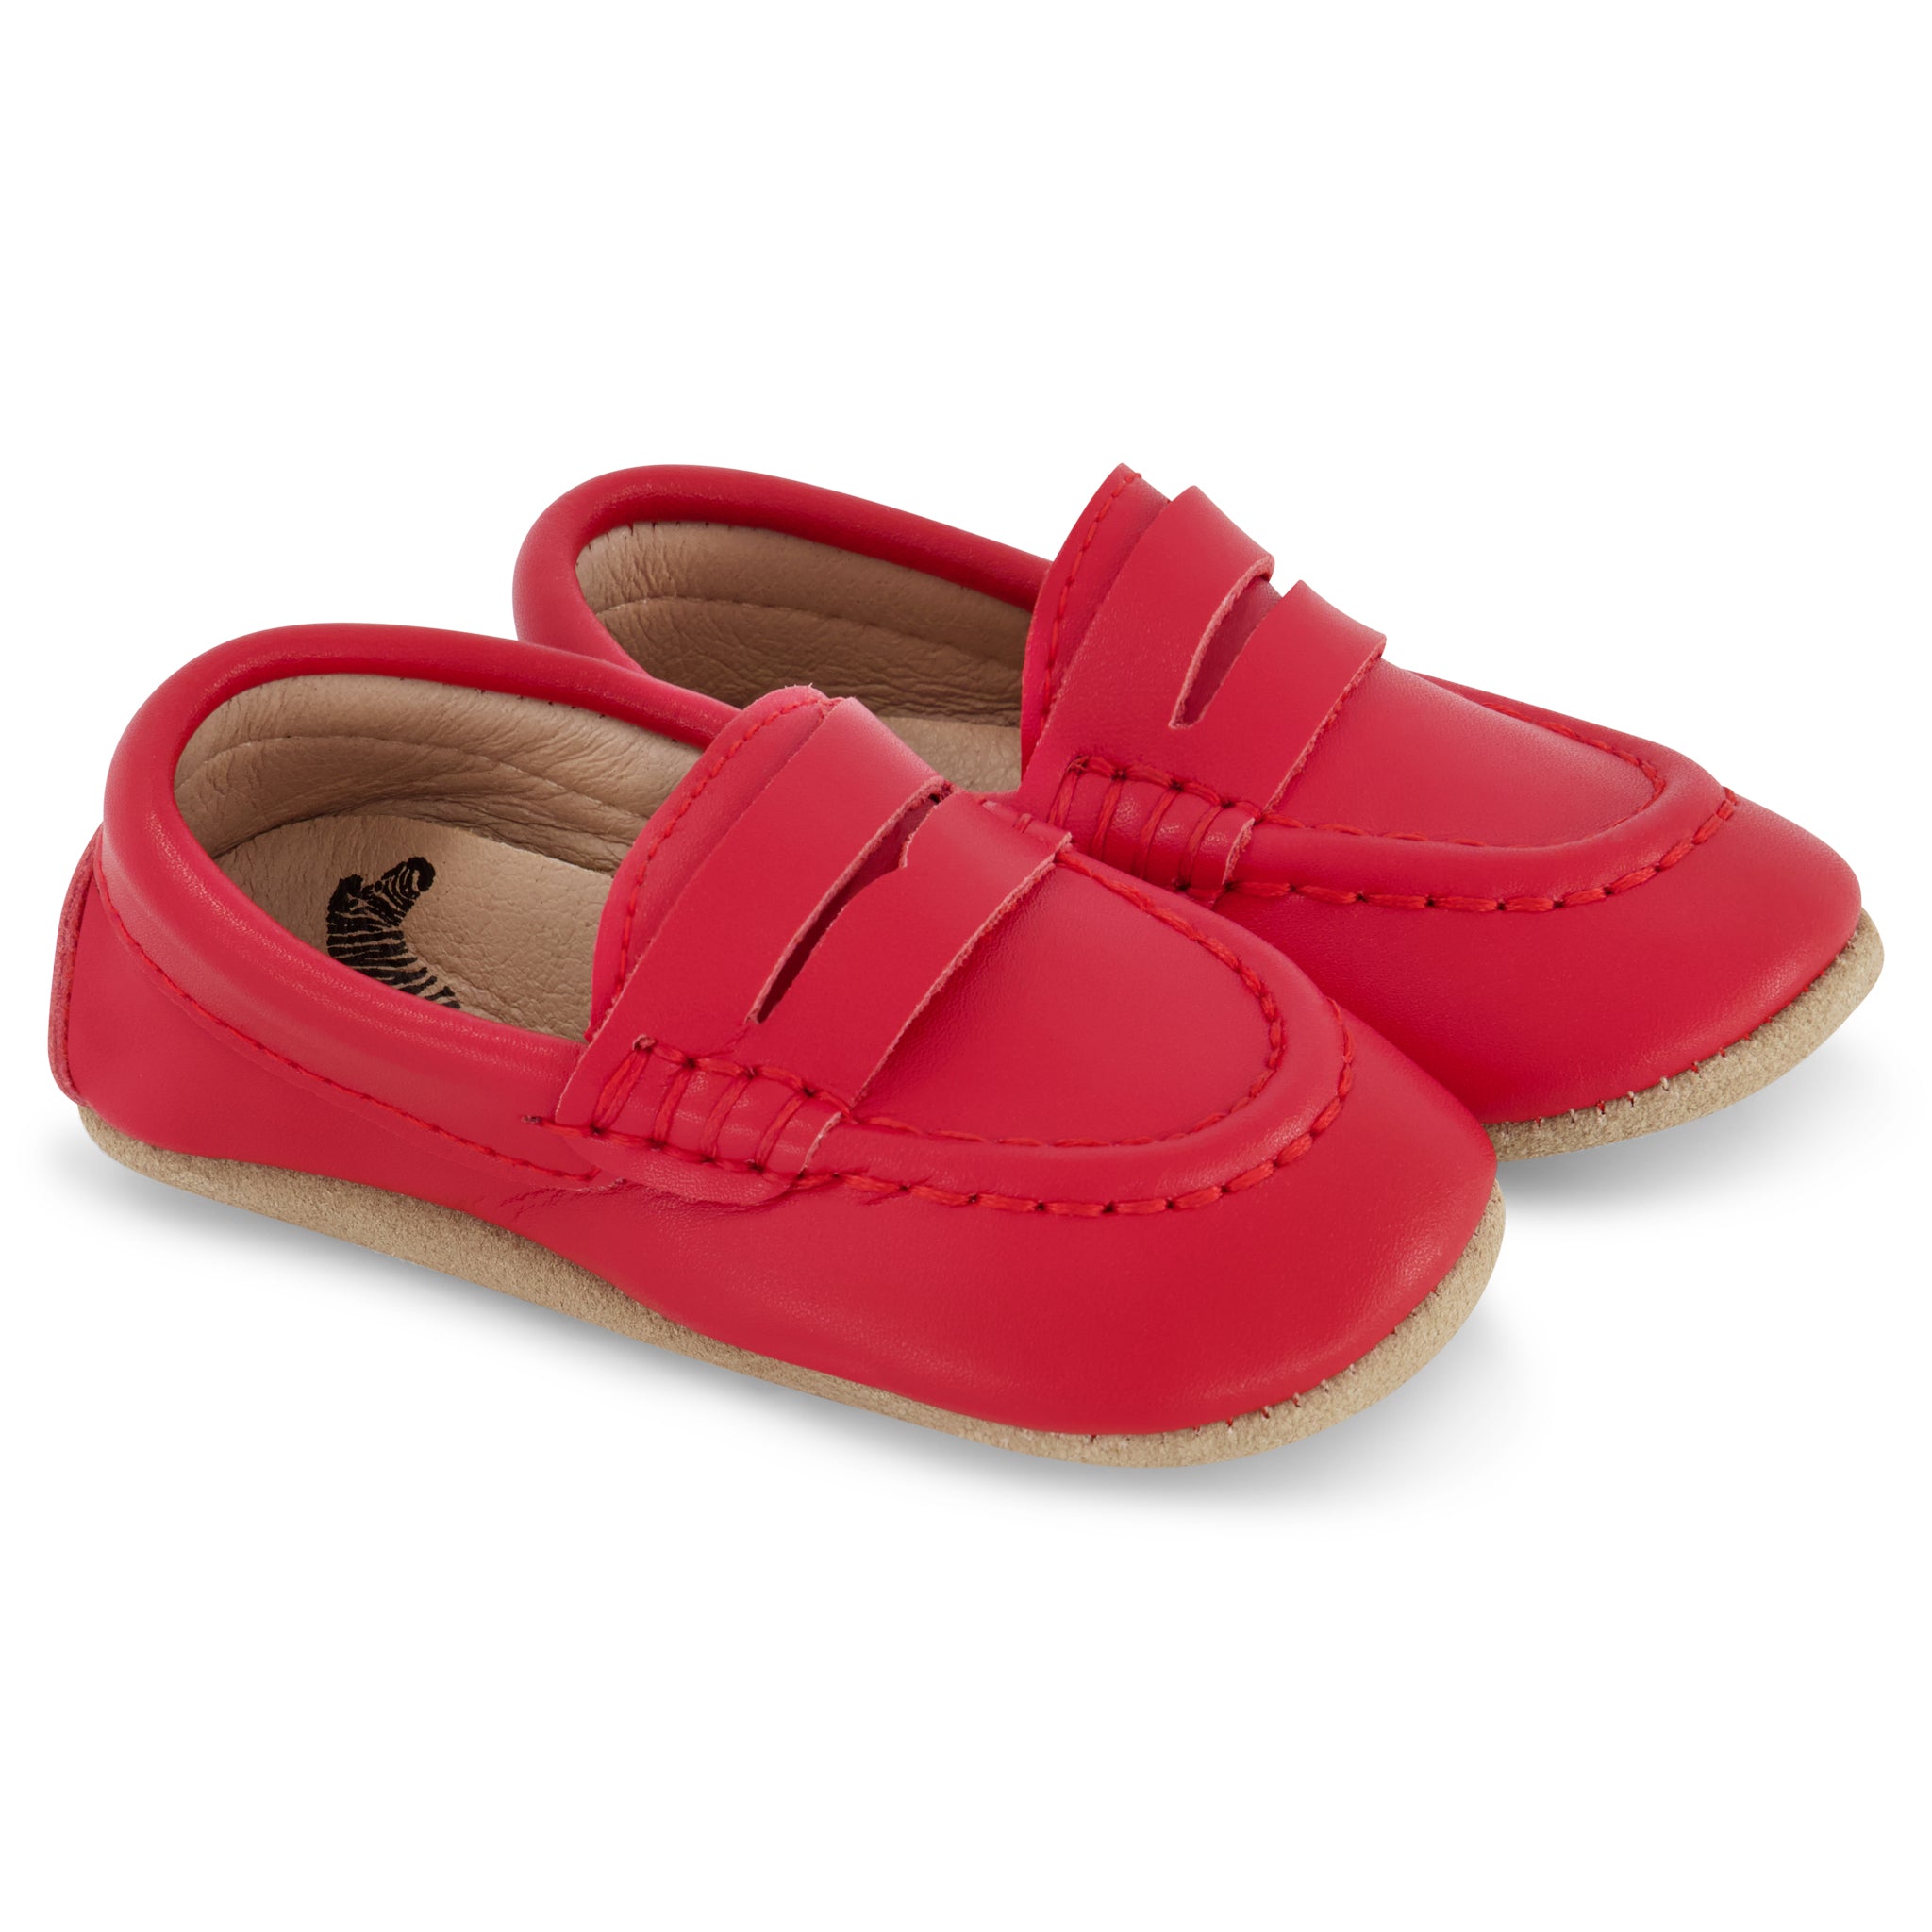 Strawberry Loafer | The Balloon